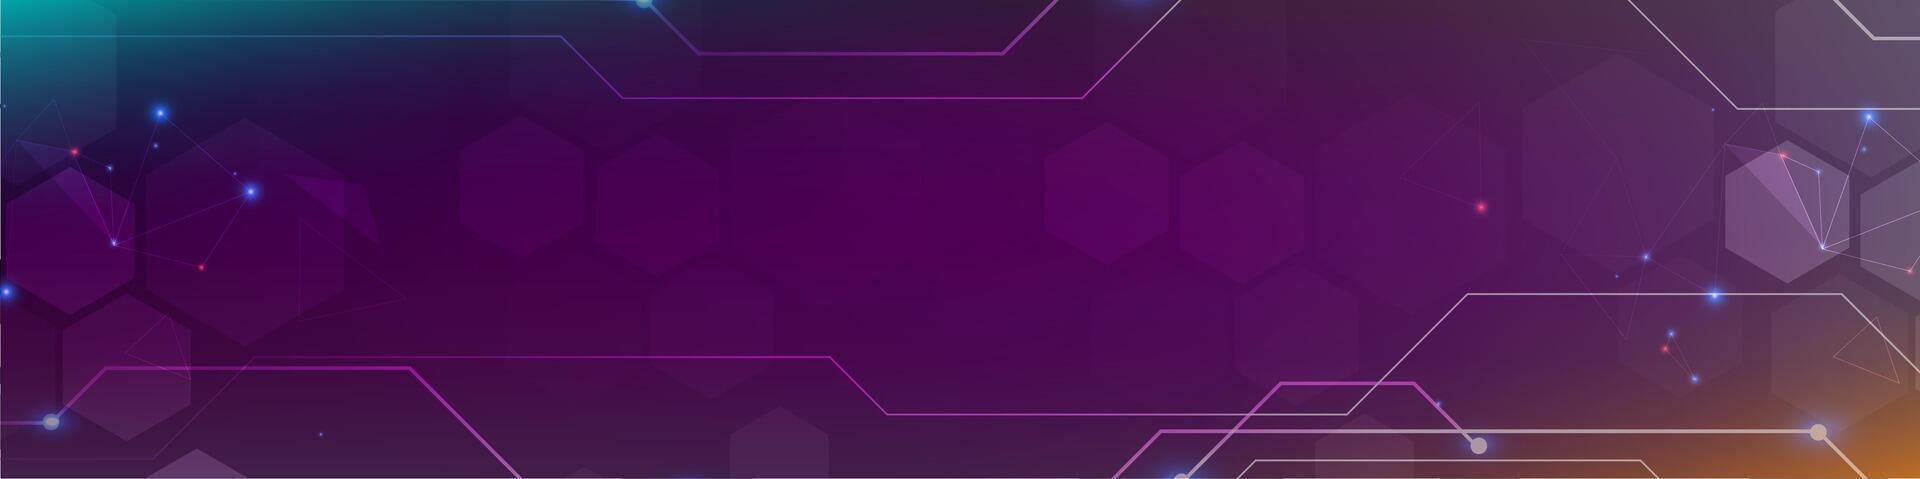 Gradient Digital technology banner. Futuristic banner for various design projects such as websites, presentations, print materials, social media posts vector